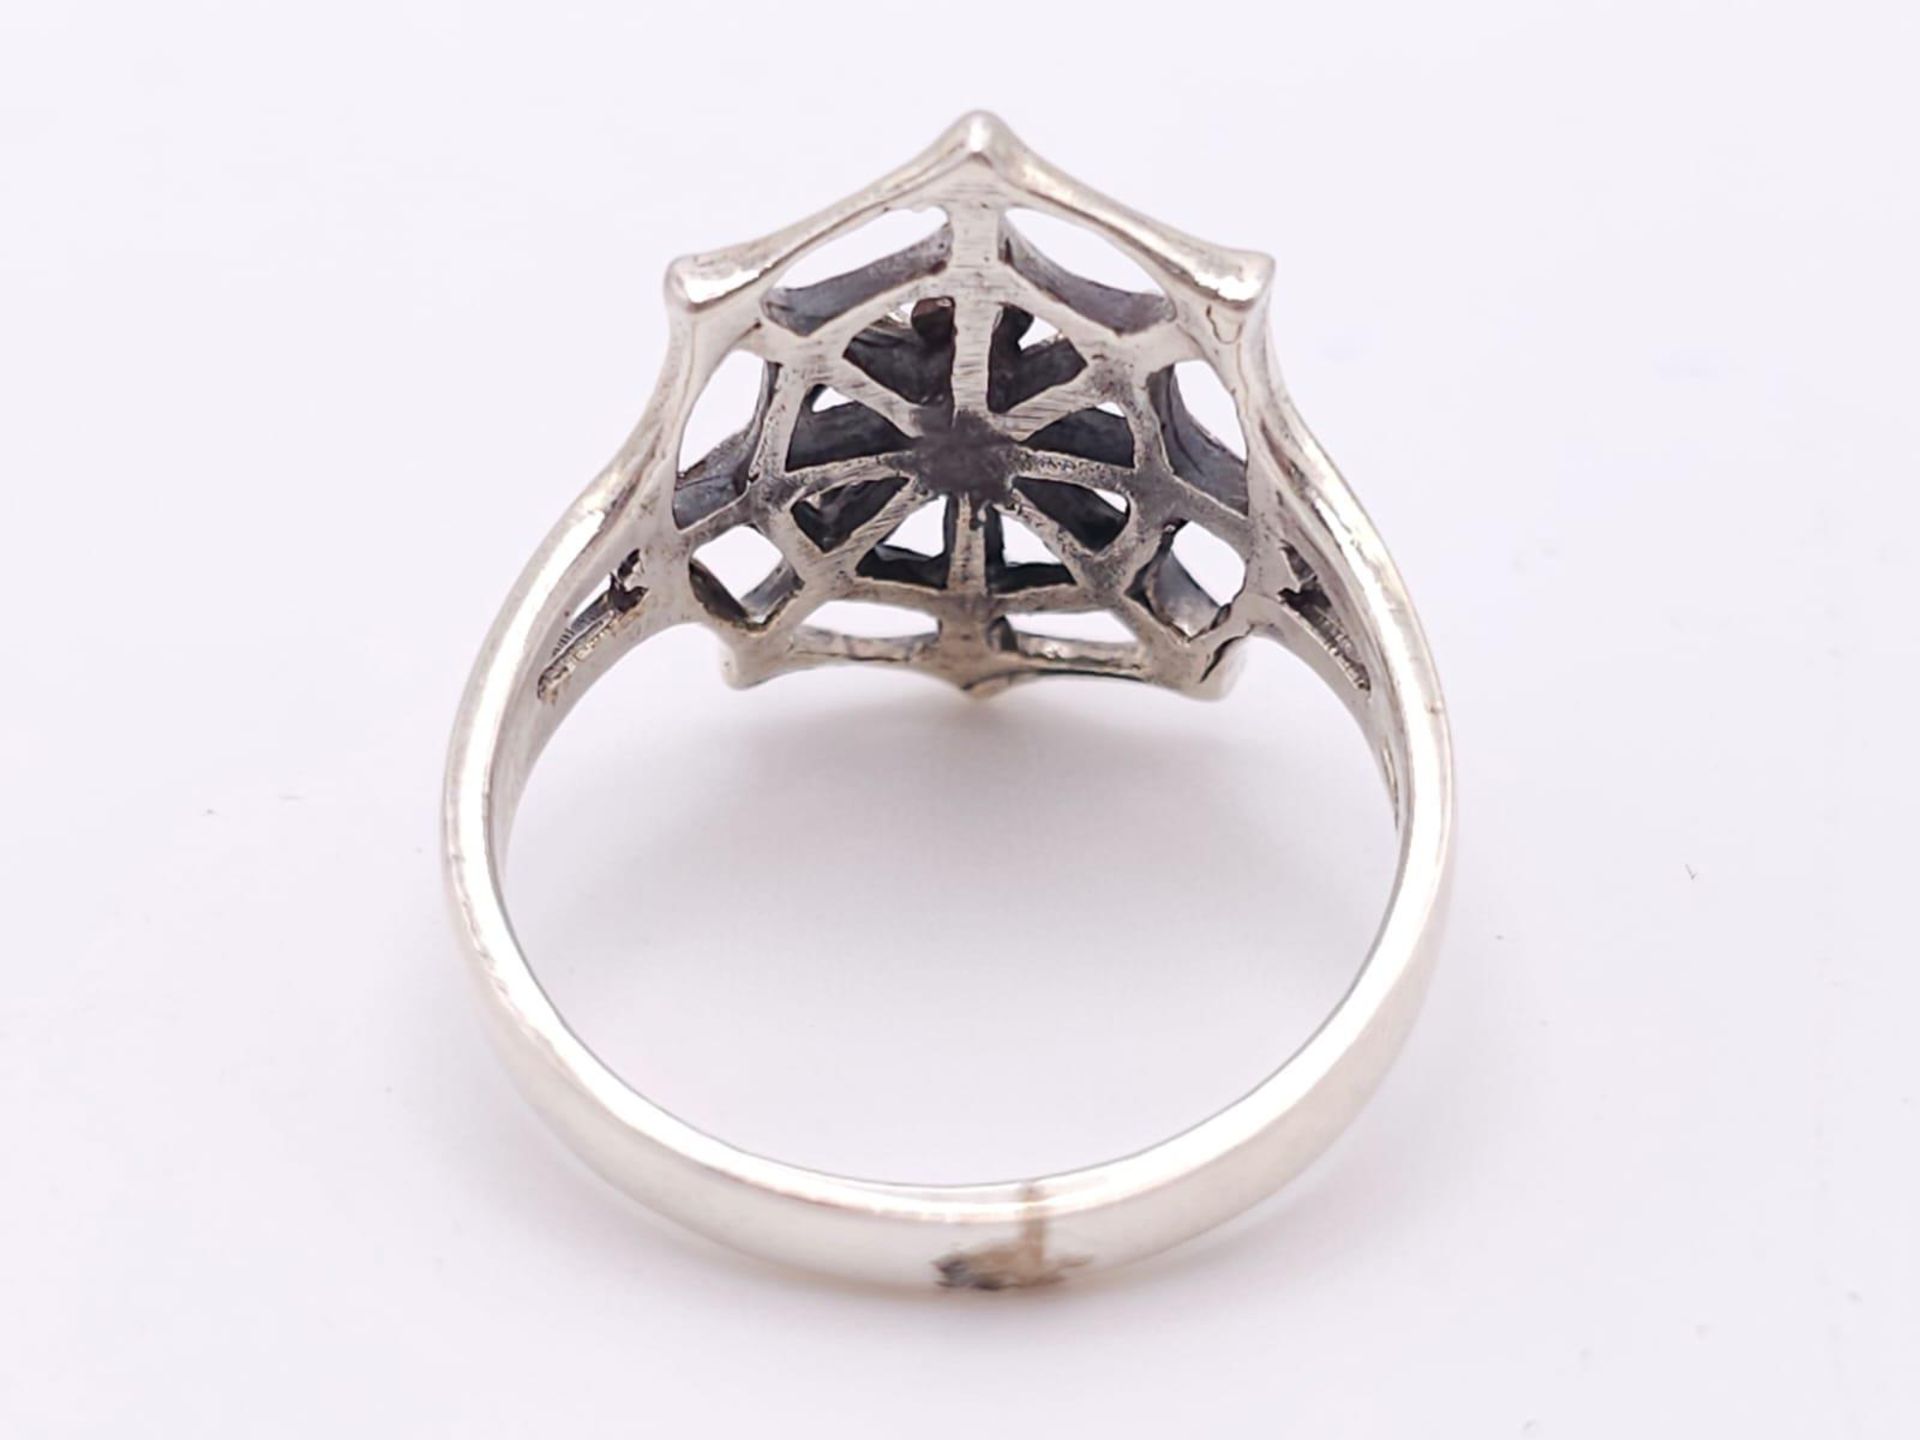 A Unique Vintage Sterling Silver Spider and Spider Web Ring Size Q. The Crown Measures 2cm Long - Image 7 of 9